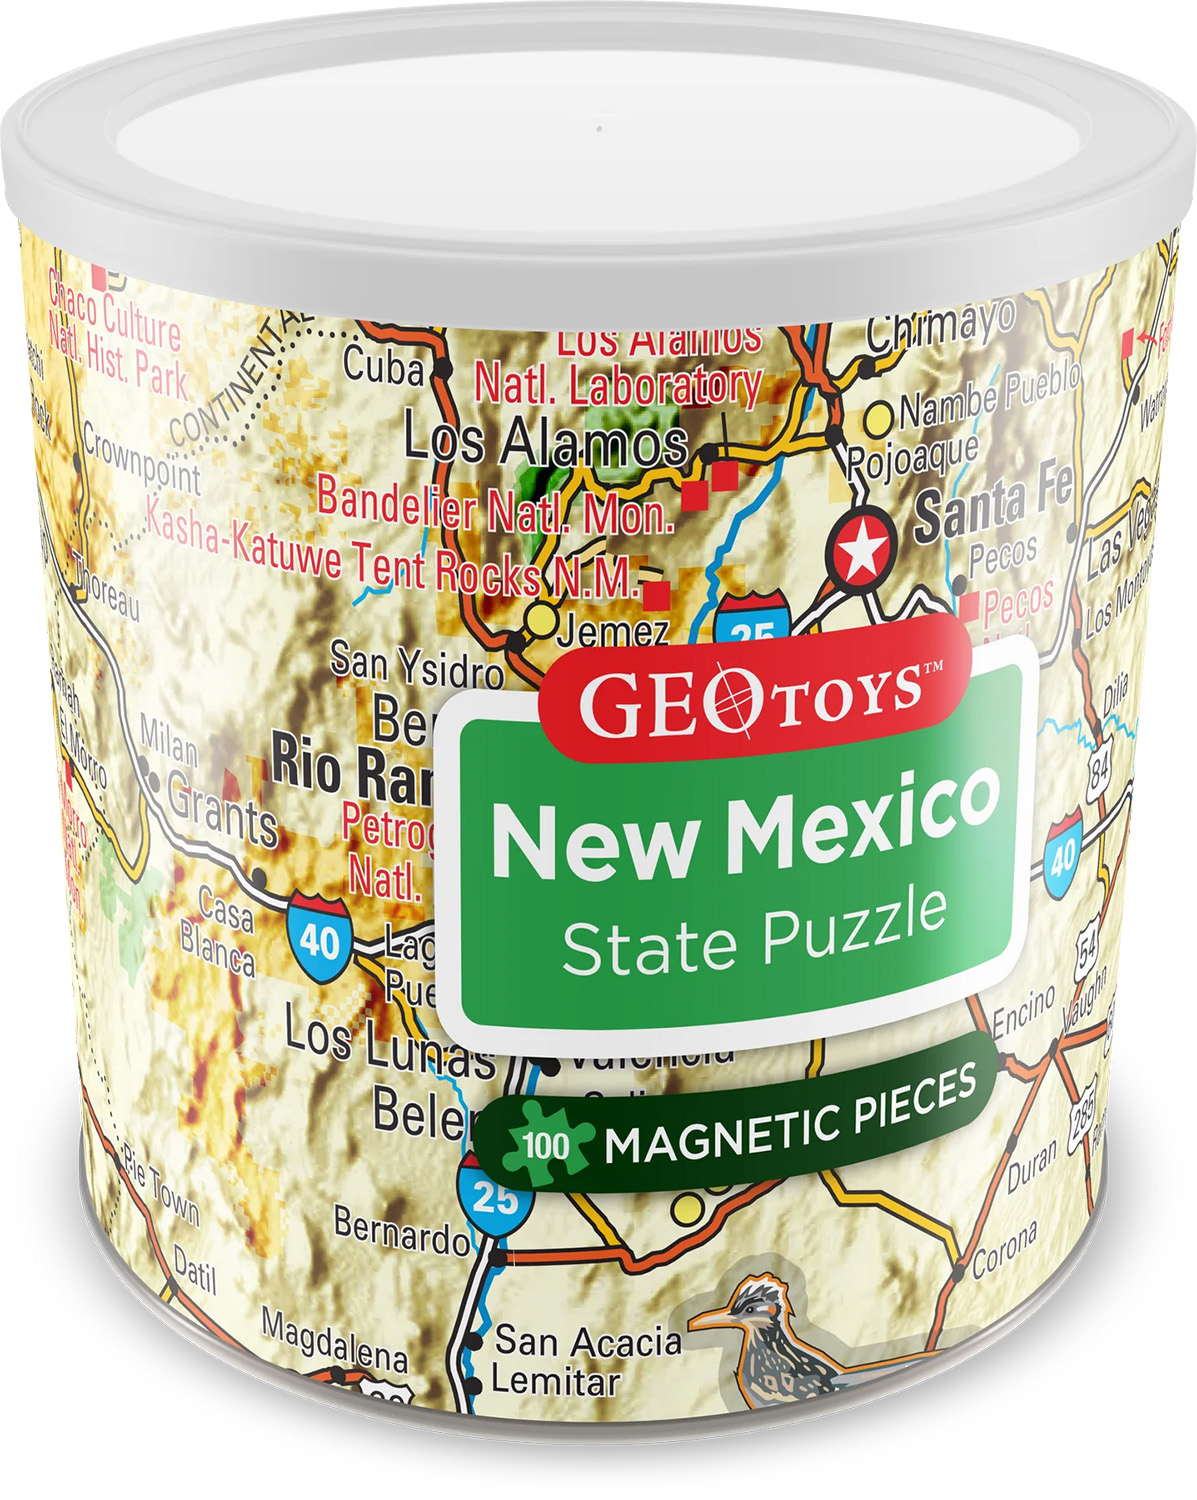 New Mexico - Magnetic Puzzle Jigsaw Puzzle